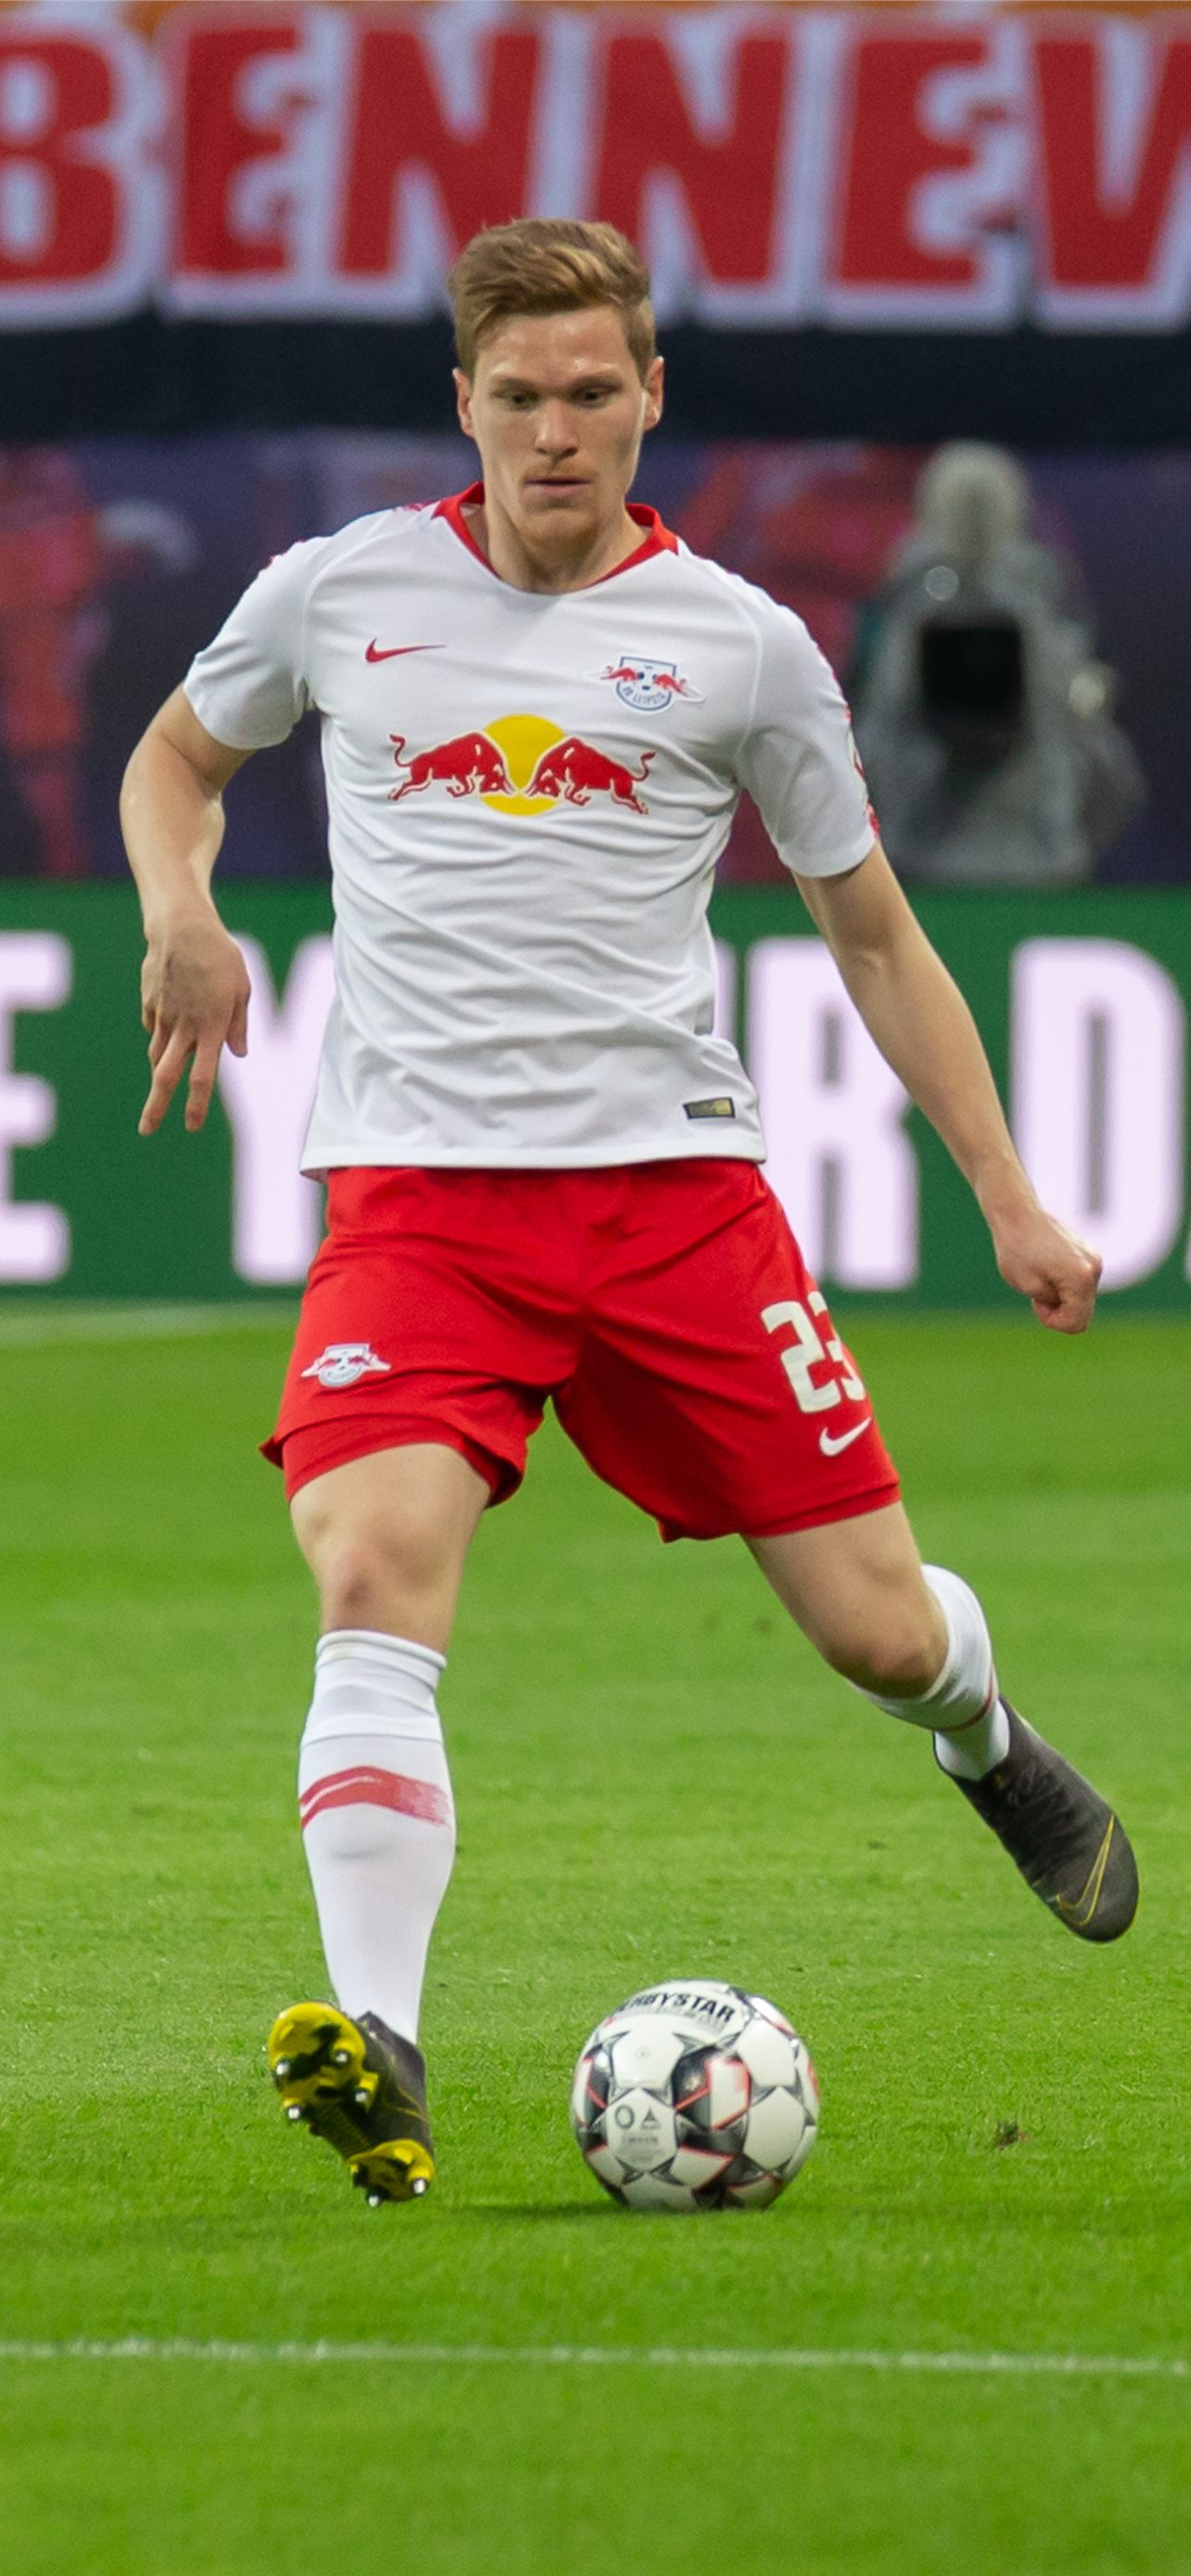 1284x2778 Best Rb leipzig iPhone HD Wallpapers